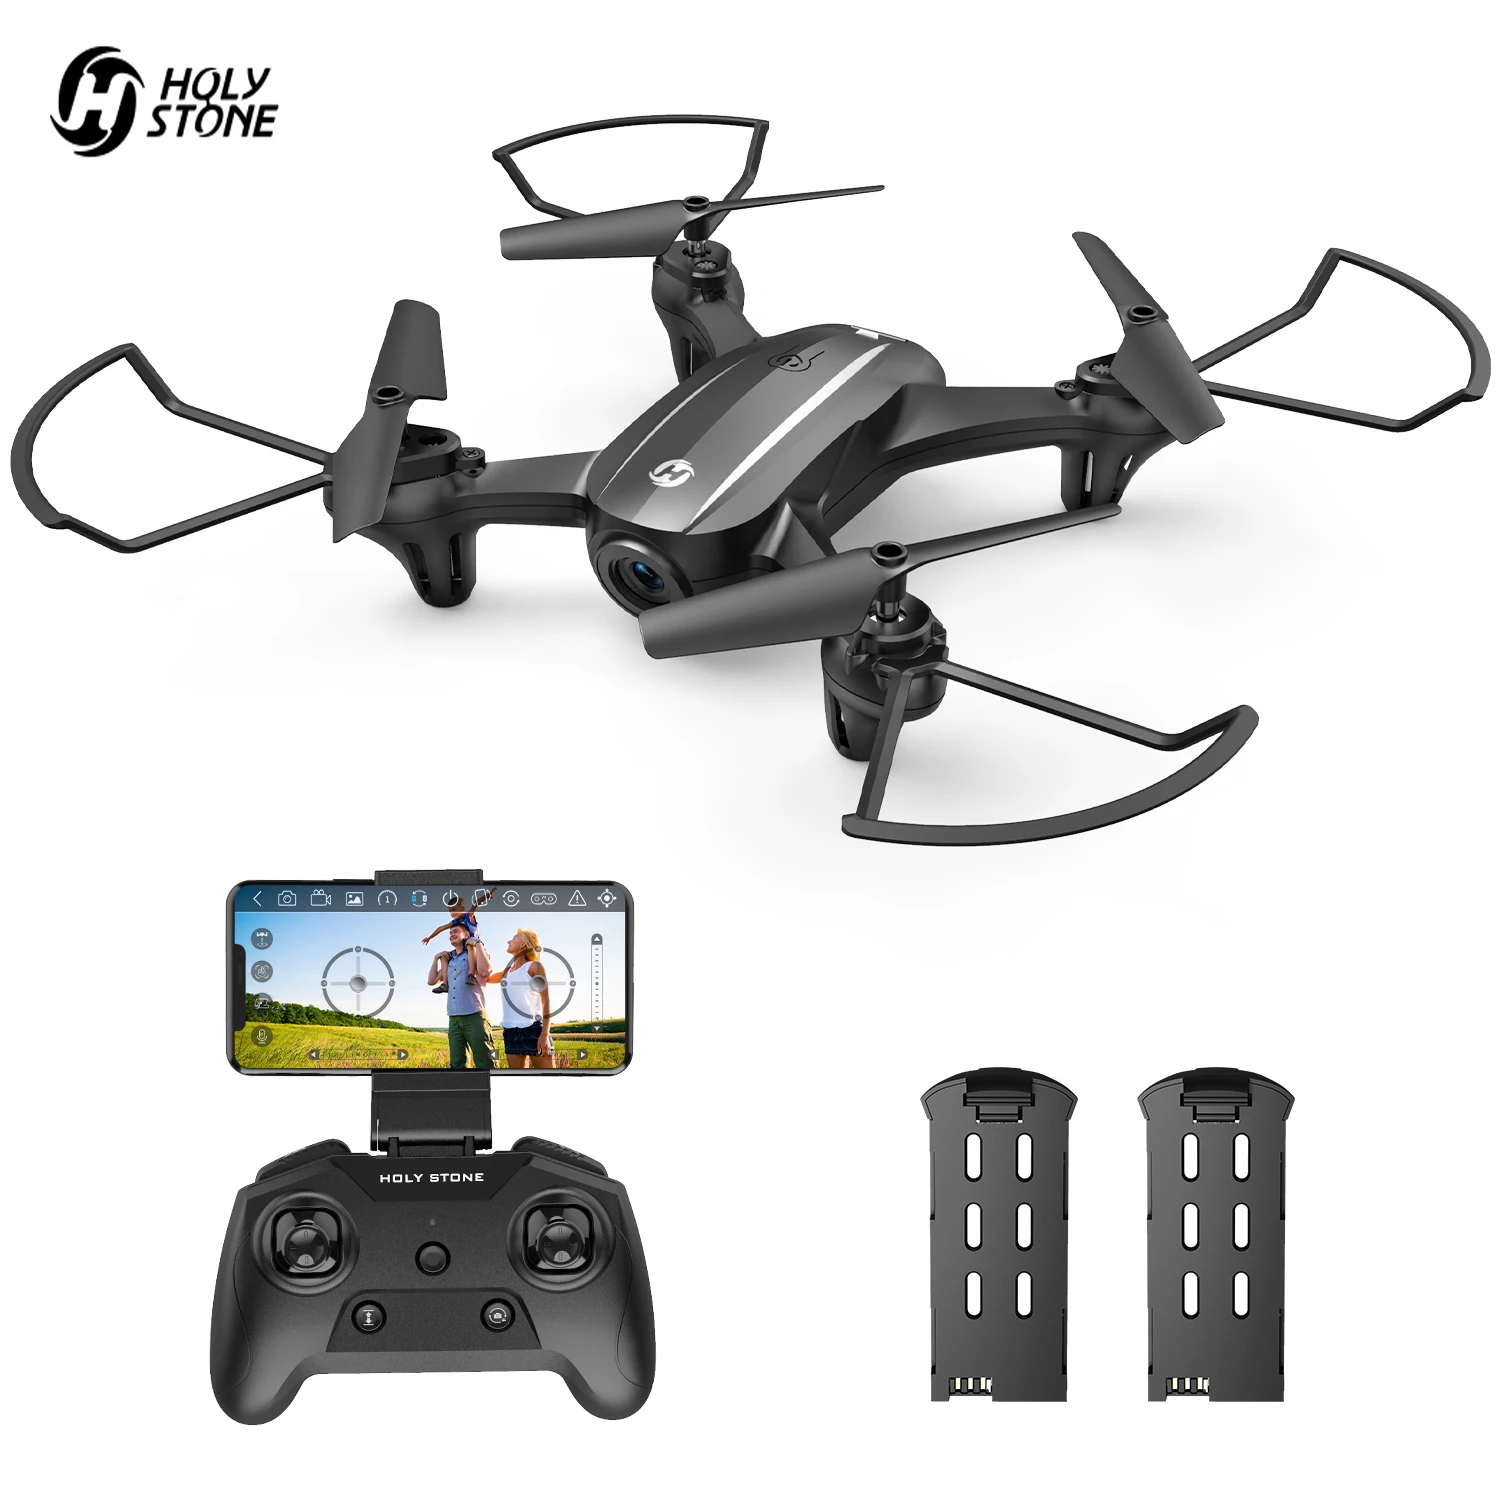 Holy Stone HS340 Mini Drone 720P FPV Camera RC Quadcopter Circle Fly 3D Flips Gesture/Voice Control Waypoint Fly 2 Batteries